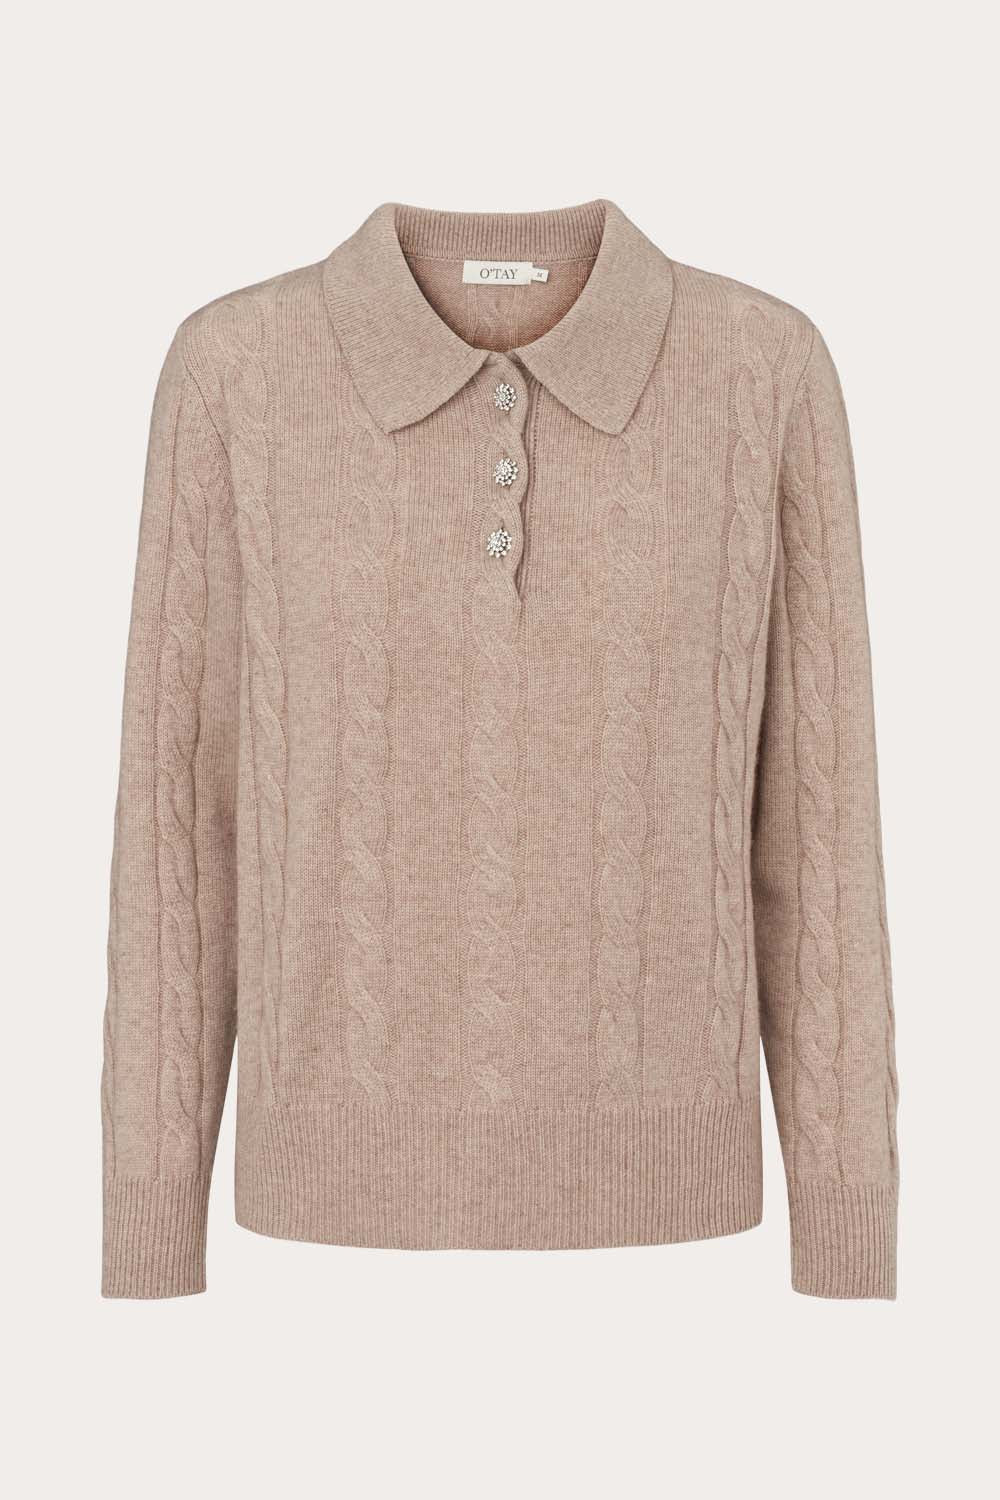 O'TAY Dolly Sweater Bluser Ludlow